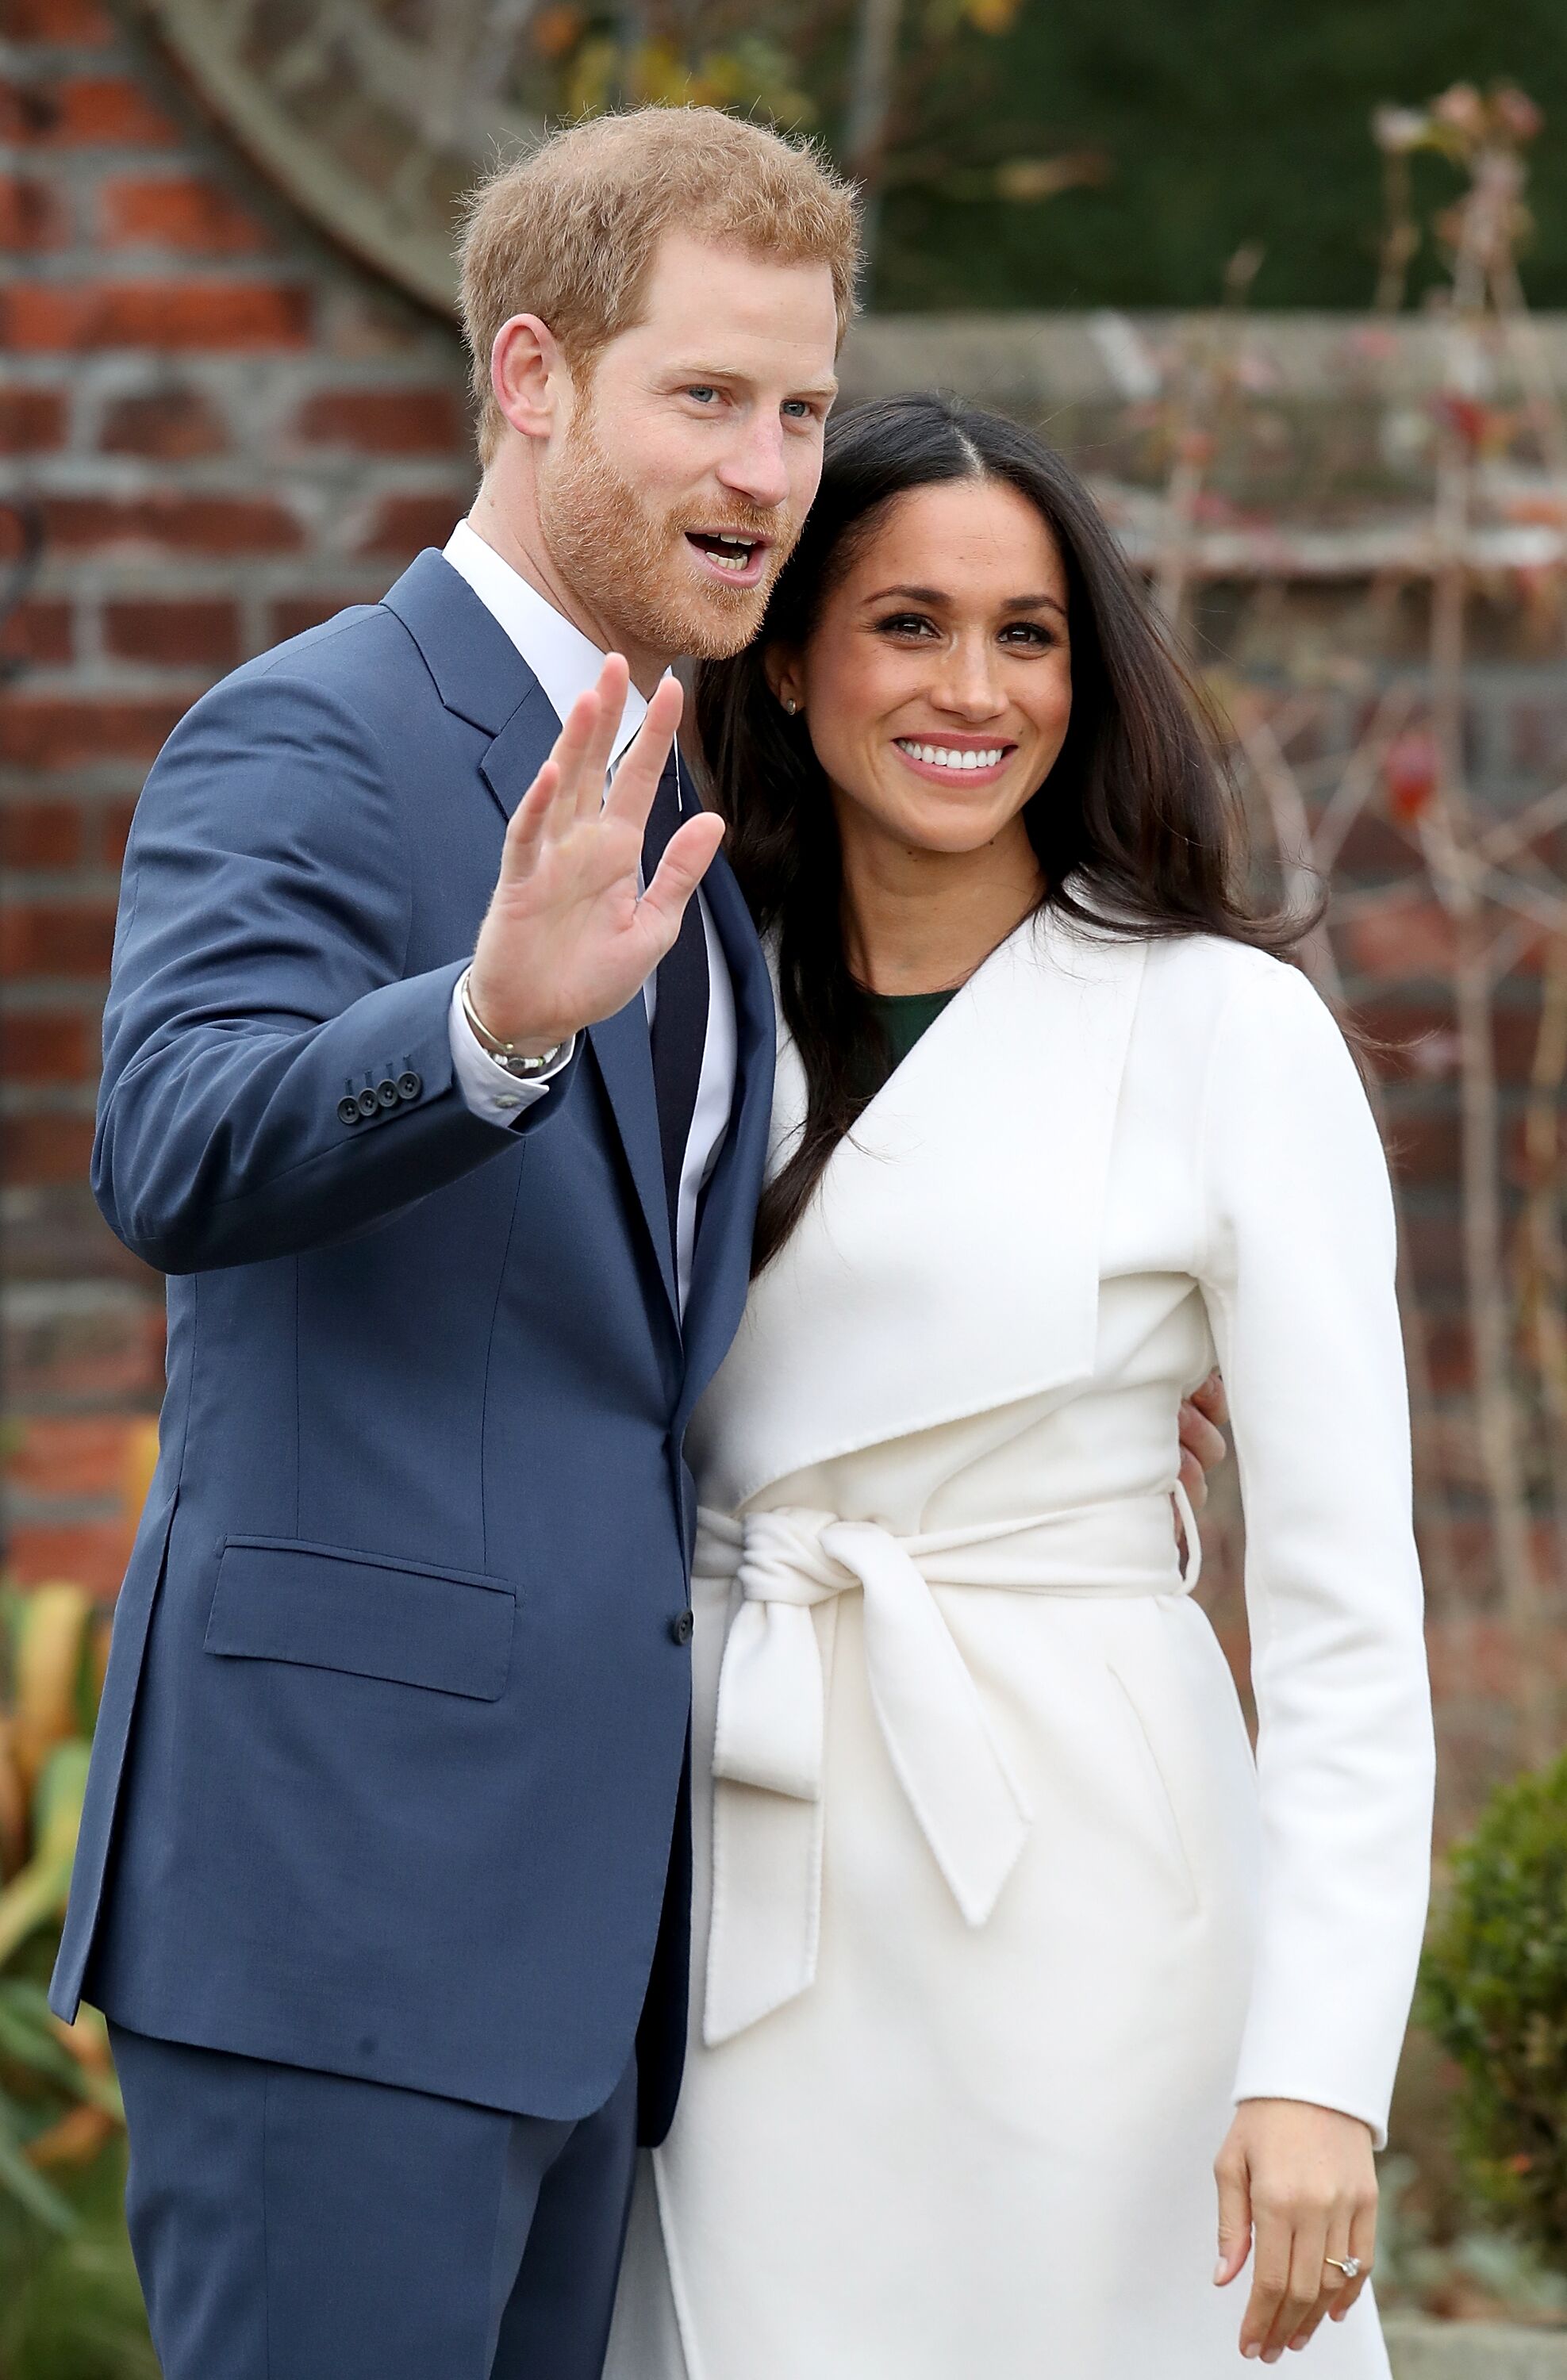 Prince Harry and Duchess Meghan during an official photocall to announce their engagement on November 27, 2017, in London, England | Photo: Chris Jackson/Chris Jackson/Getty Images